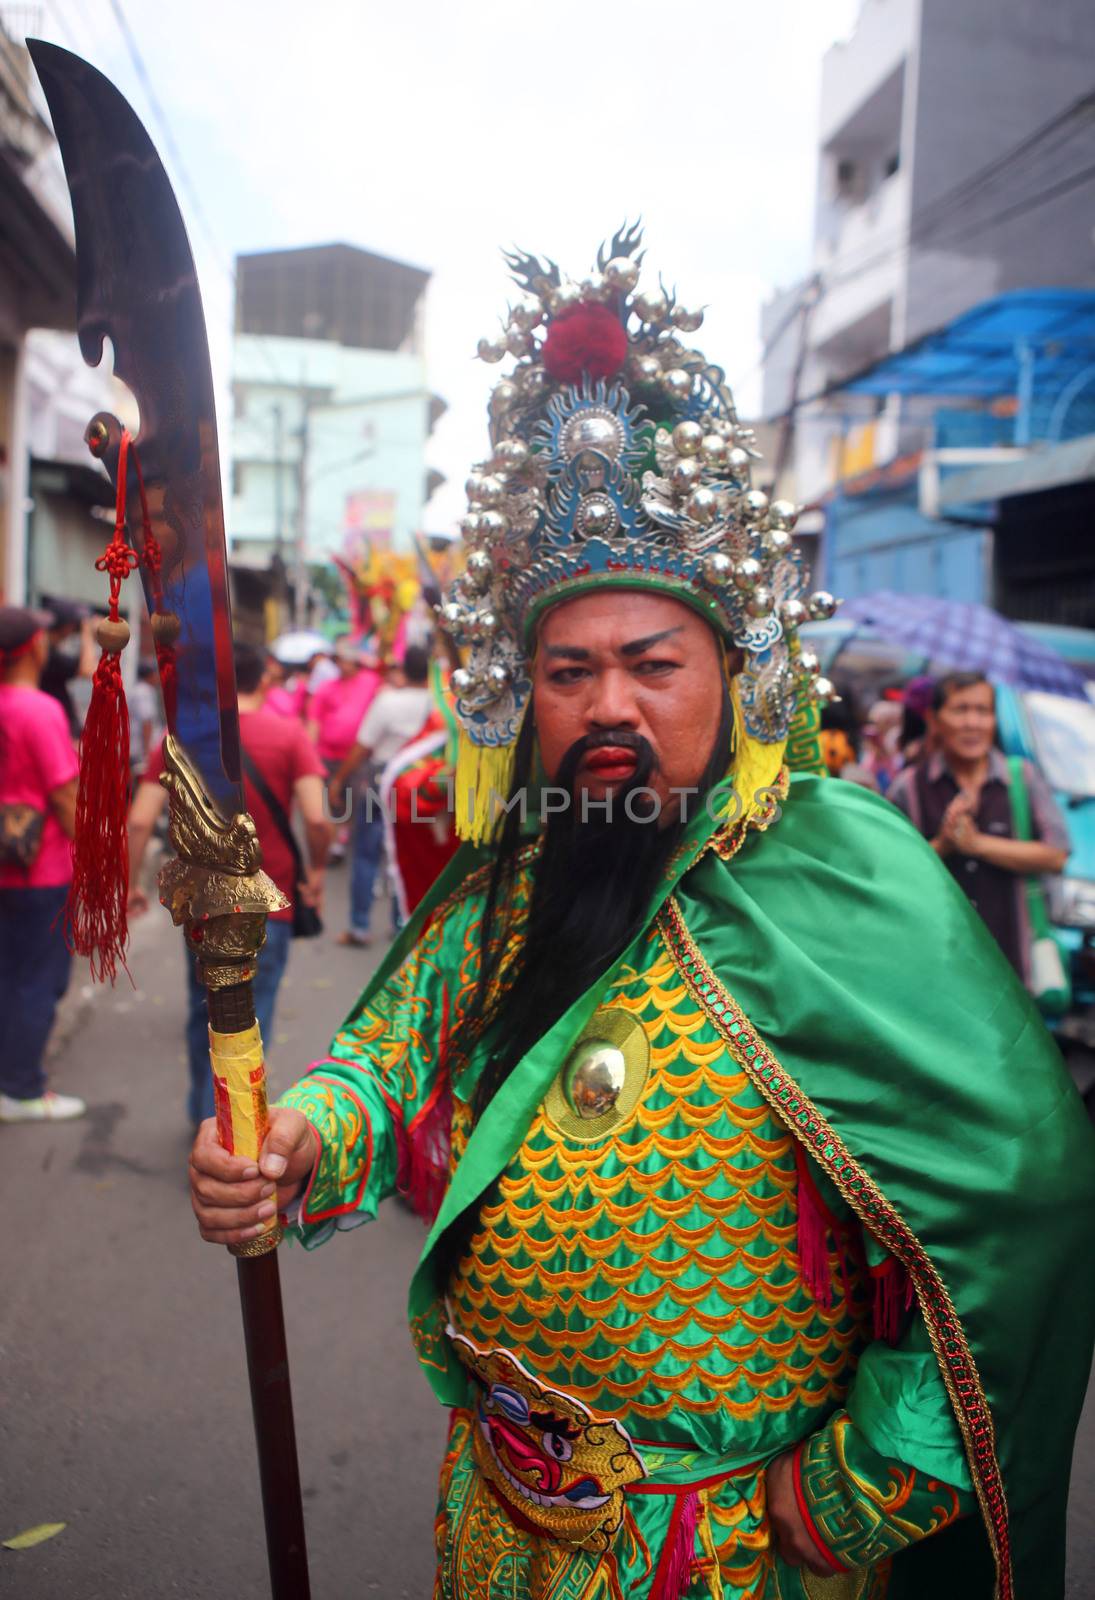 INDONESIA, Jakarta: A costumed man celebrates the Chinese New Year in Jakarta, Indonesia at the Cap Go Meh carnival in the Glodok area on February 21, 2016. Residents of this Chinese neighborhood hold a colorful procession, complete with costumes and mascots welcoming the Year of the Monkey.  